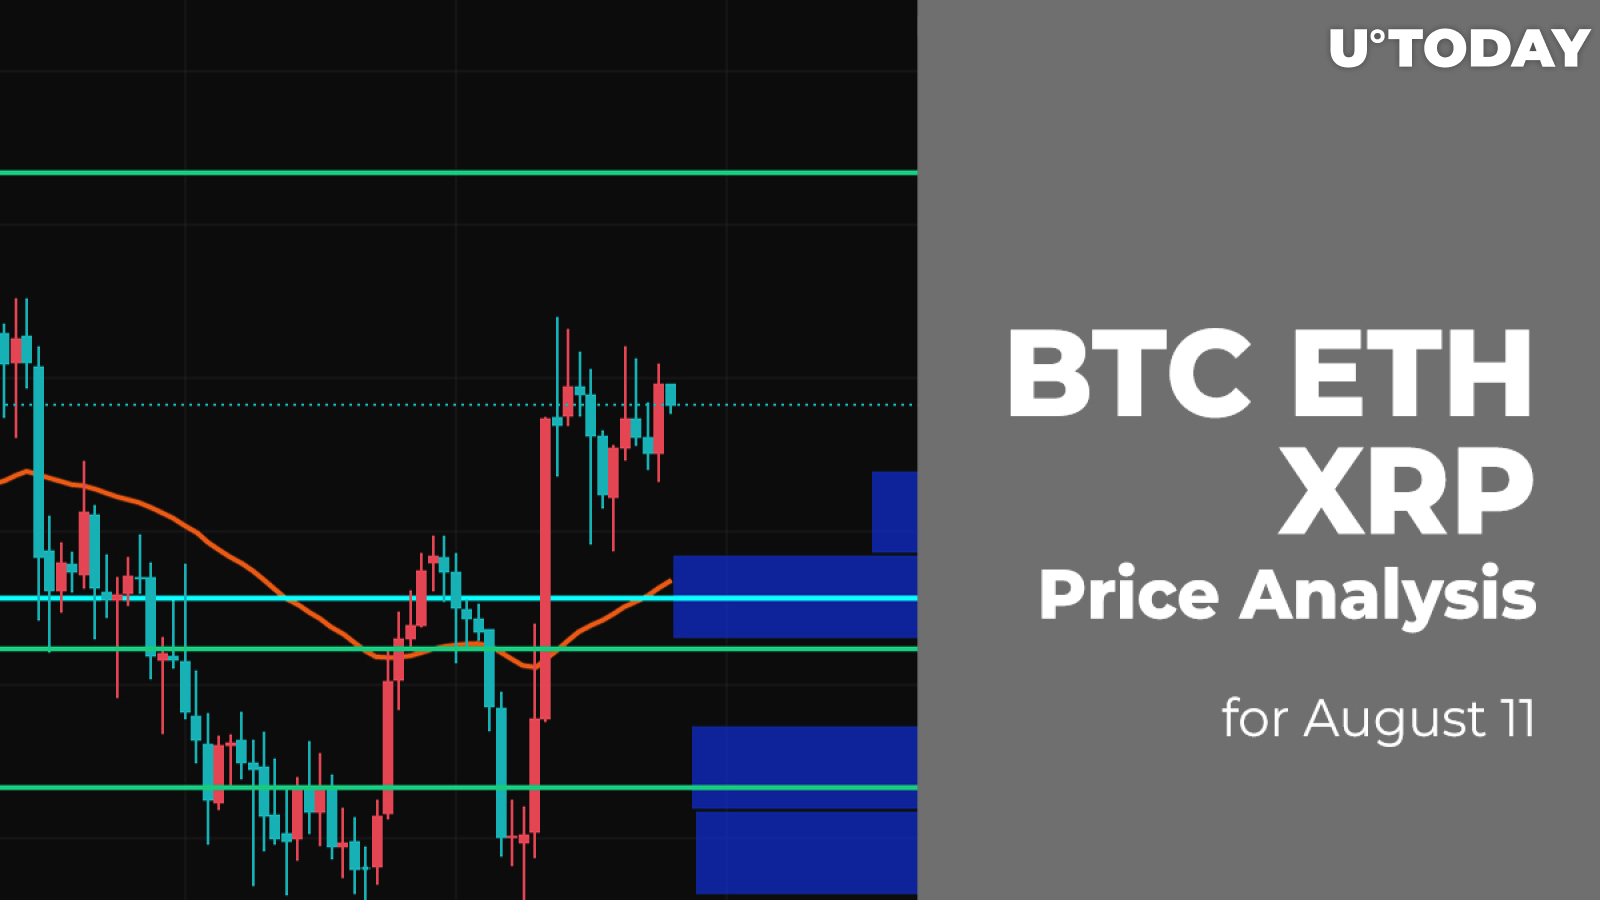 BTC, ETH and XRP Price Analysis for August 11